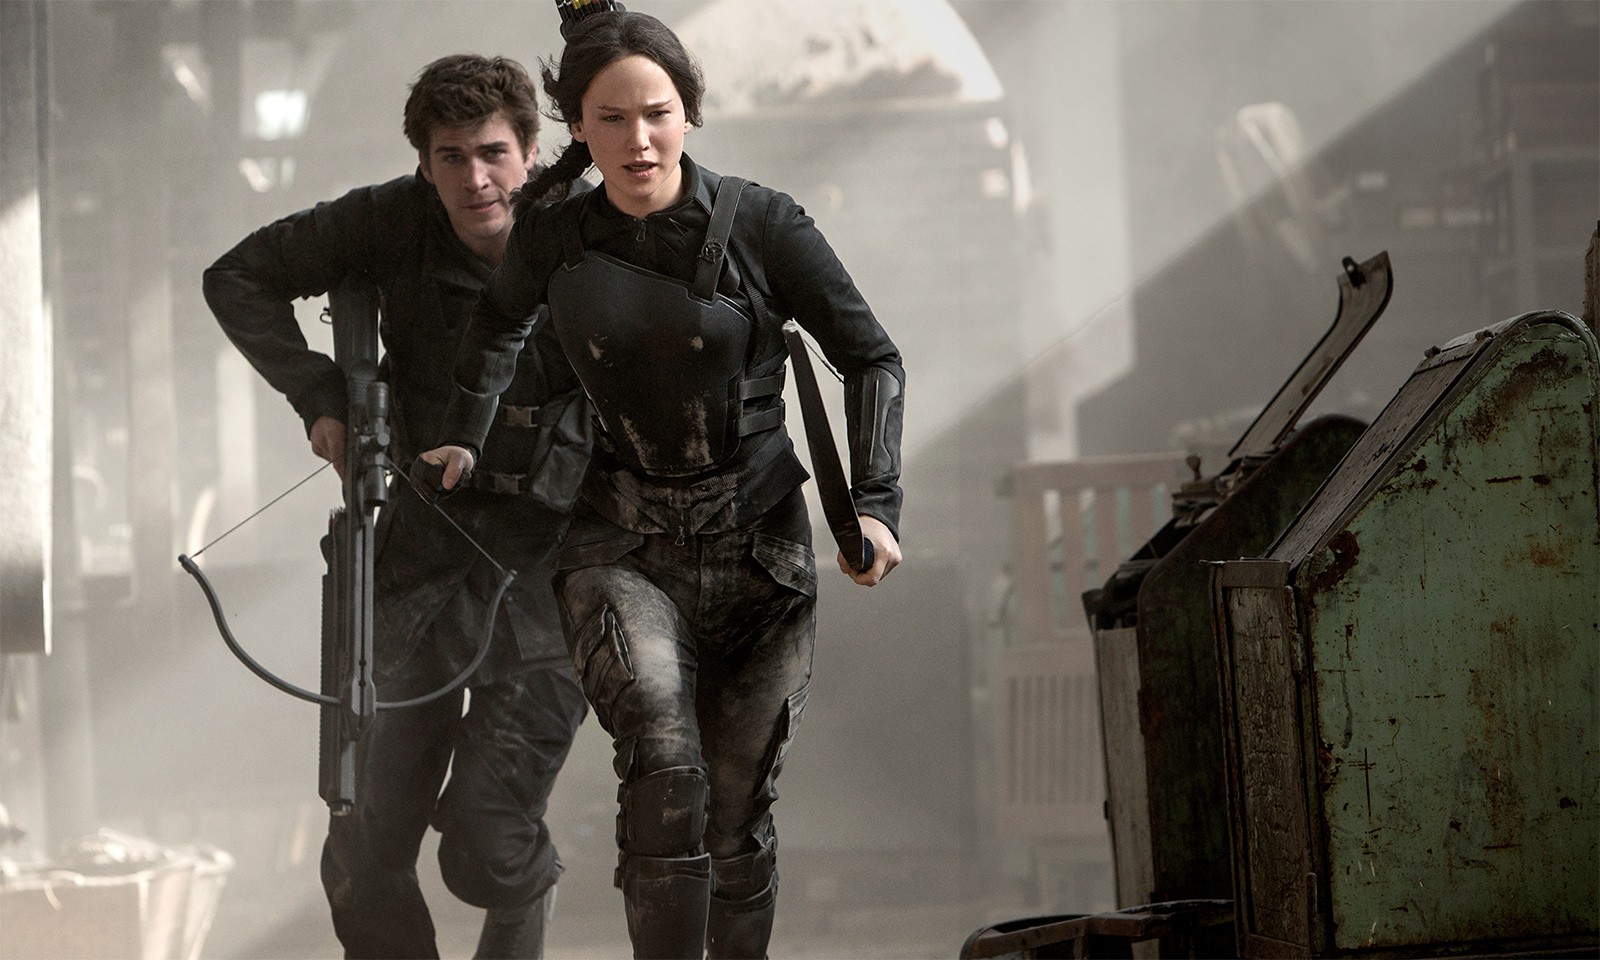 Liam Hemsworth stars as Gale Hawthorne and Jennifer Lawrence stars as Katniss Everdeen in Lionsgate Films' The Hunger Games: Mockingjay, Part 1 (2014)